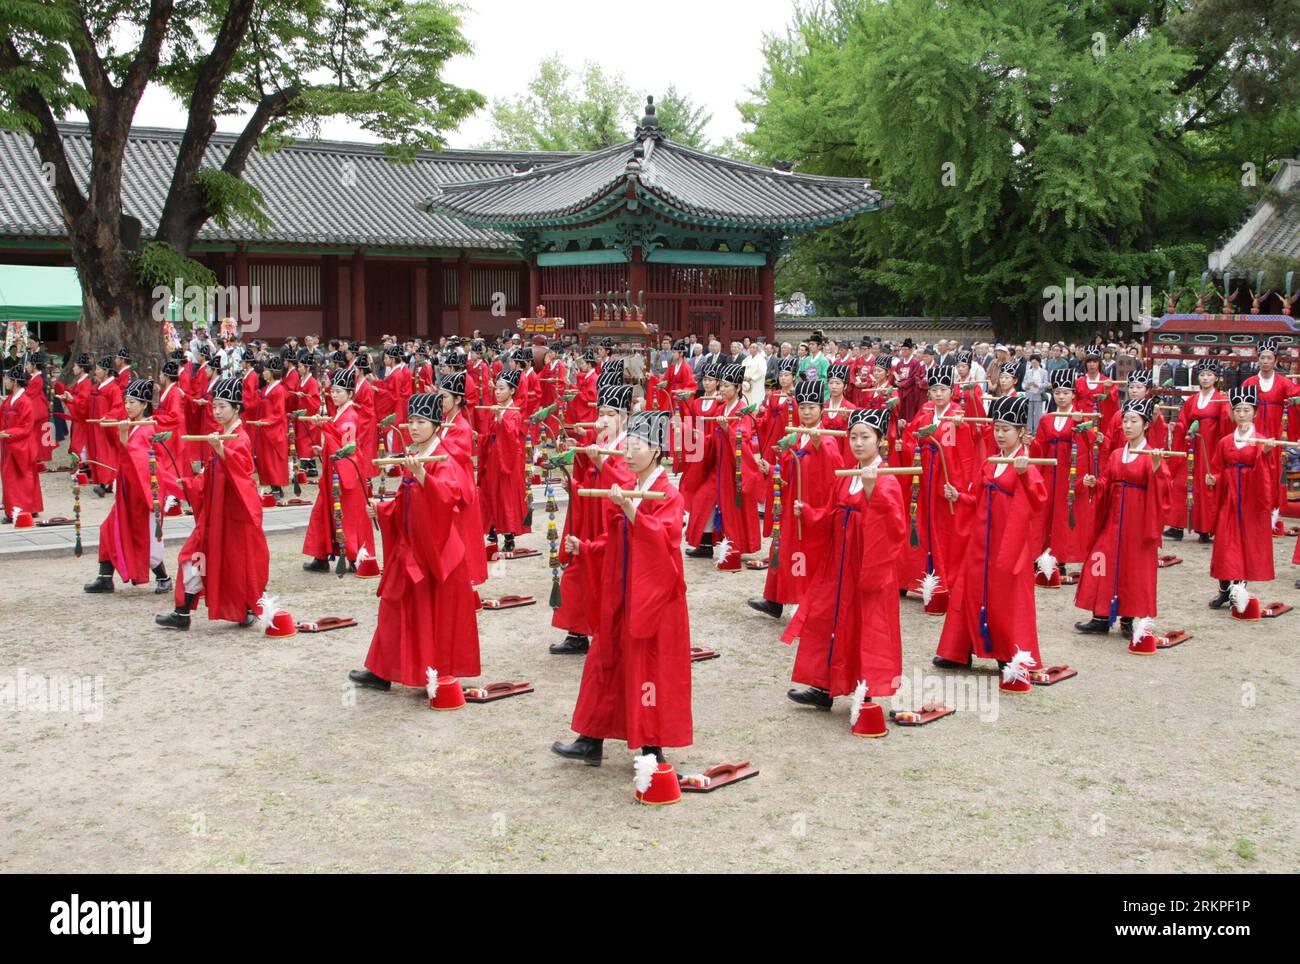 Bildnummer: 57979827  Datum: 11.05.2012  Copyright: imago/Xinhua (120511) -- SEOUL, May 11, 2012 (Xinhua) -- College students wearing traditional costumes perform traditional ritual at a Confucian shrine in Seoul, South Korea, May 11, 2012. The Confucius ritual is staged twice a year at the Confucian Shrine at Sungkyunkwan University in Seoul, which was built during the Joseon Dynasty in 1398 for Korean Confucian scholars to honor Confucius. (Xinhua/Park Jin-hee) SOUTH KOREA-SEOUL-CONFUCIUS RITUAL PUBLICATIONxNOTxINxCHN Gesellschaft xda x2x 2012 quer  o0 Konfuzianismus Tradition Bildung Uni St Stock Photo